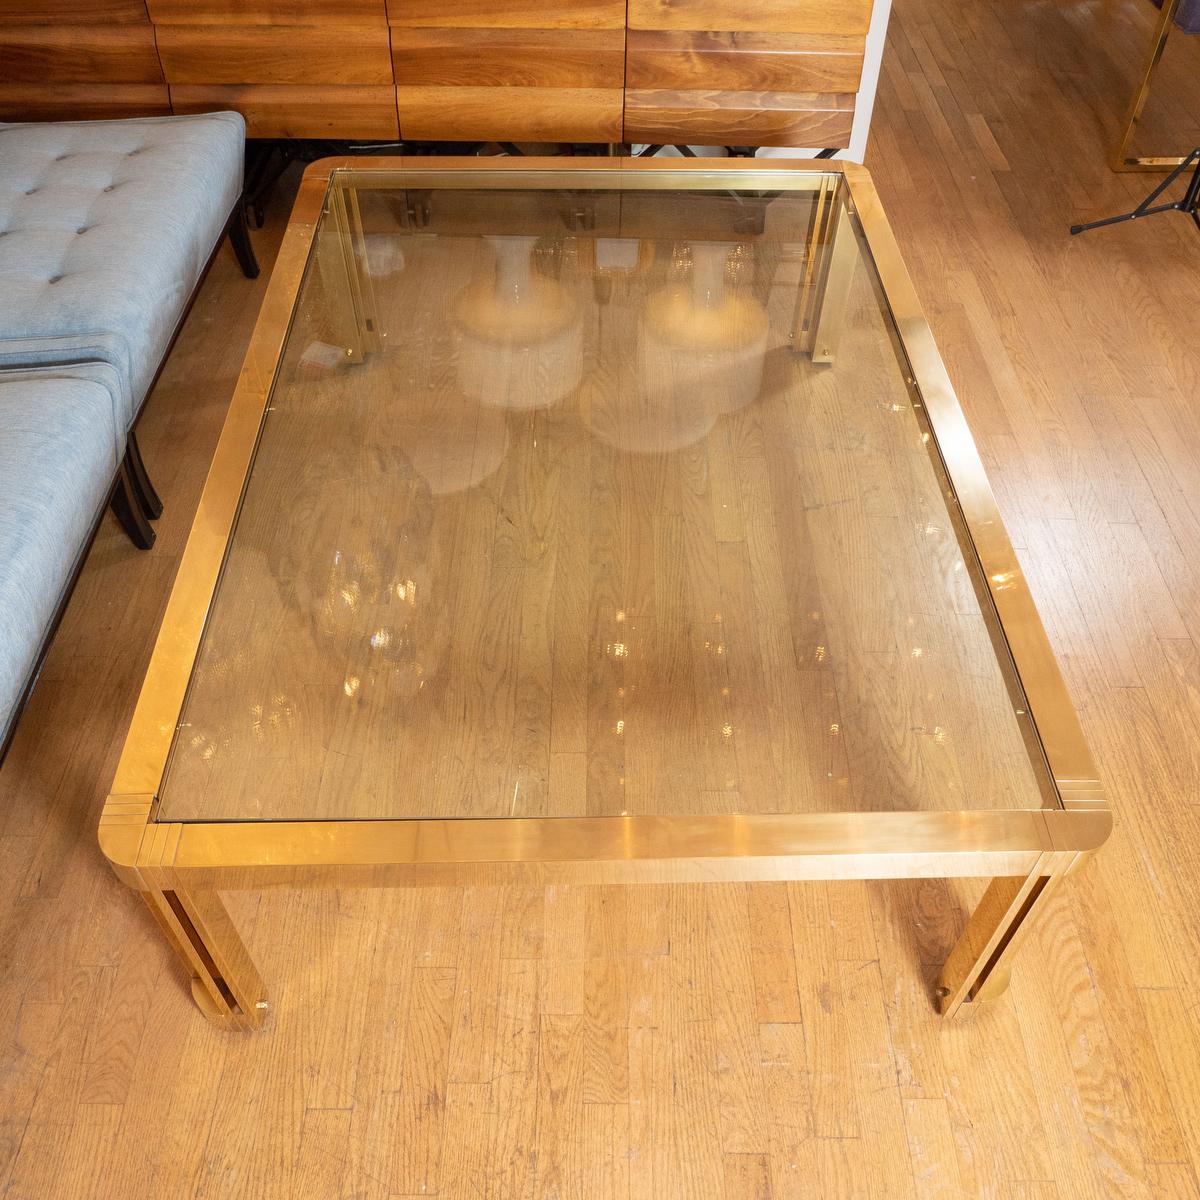 Large rectangular brass and glass coffee table with incised design.